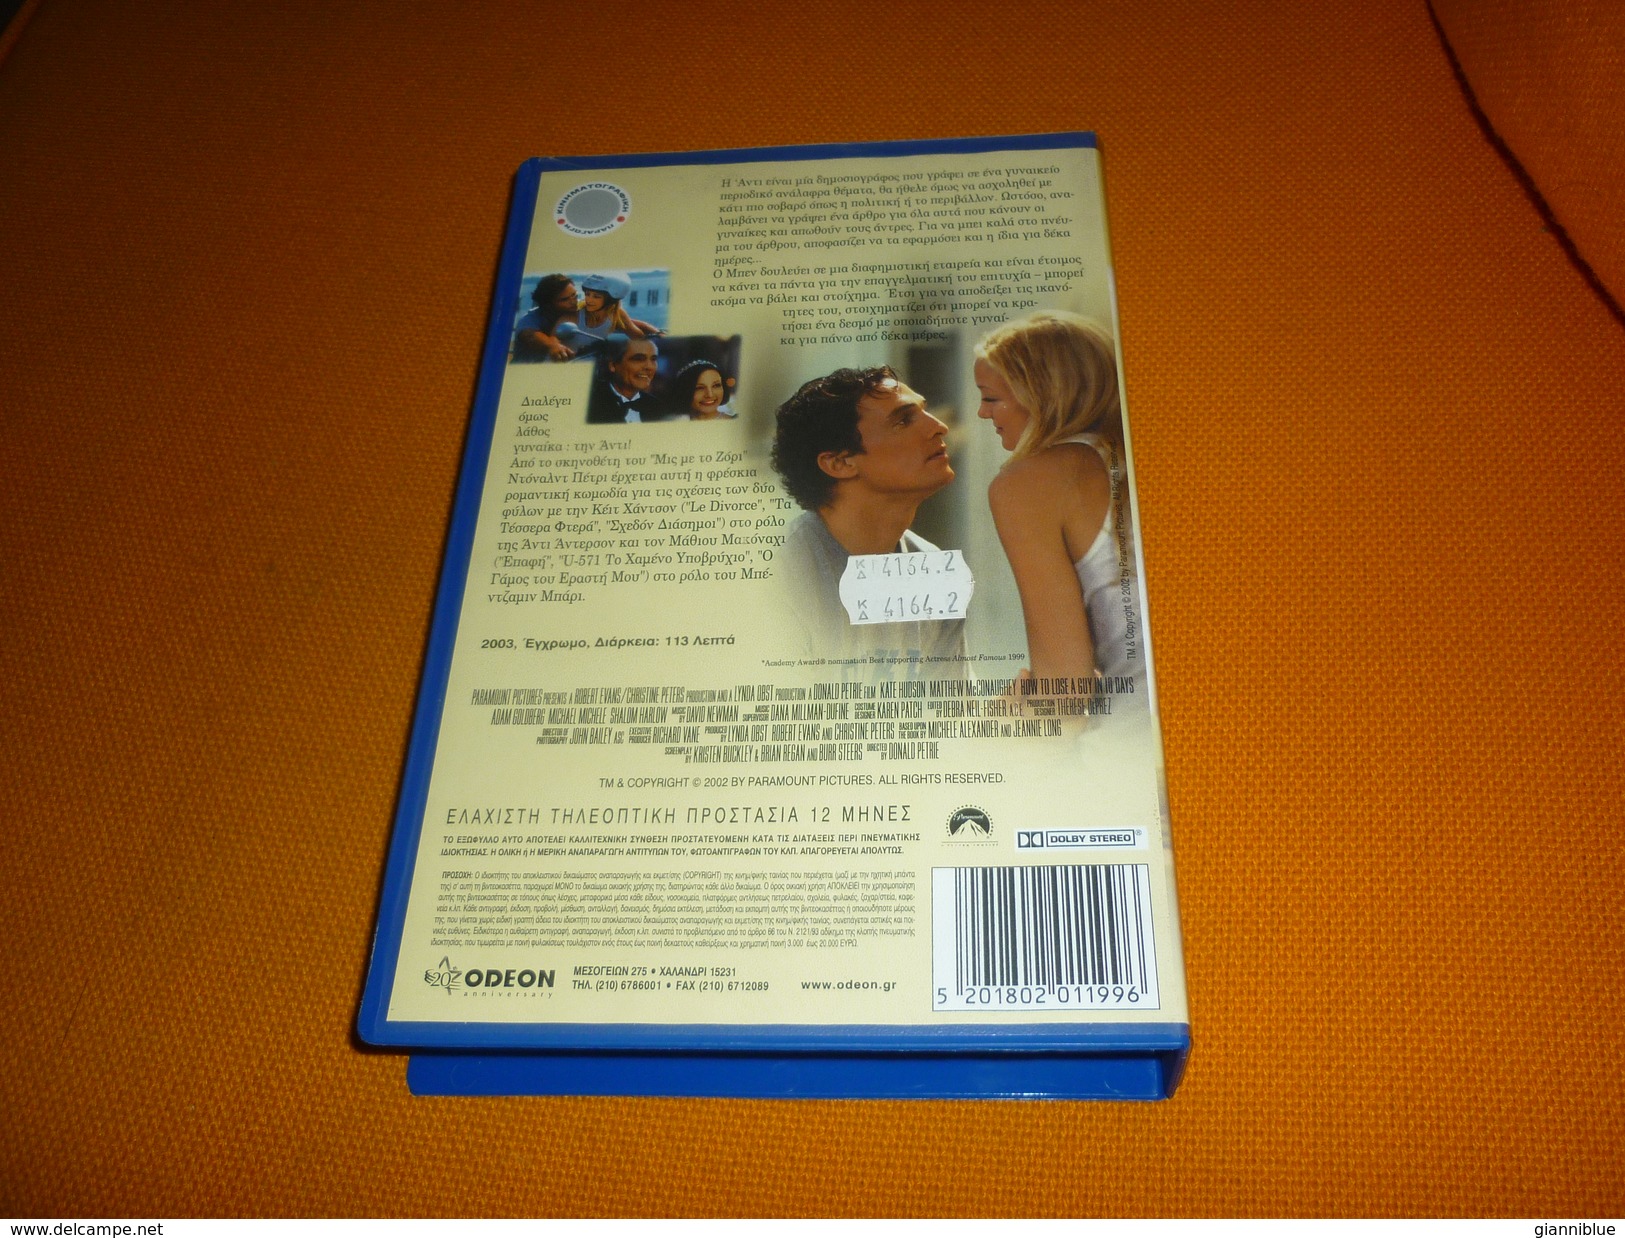 How To Lose A Guy In 10 Days Old Greek Vhs Cassette Tape From Greece - Romanticismo